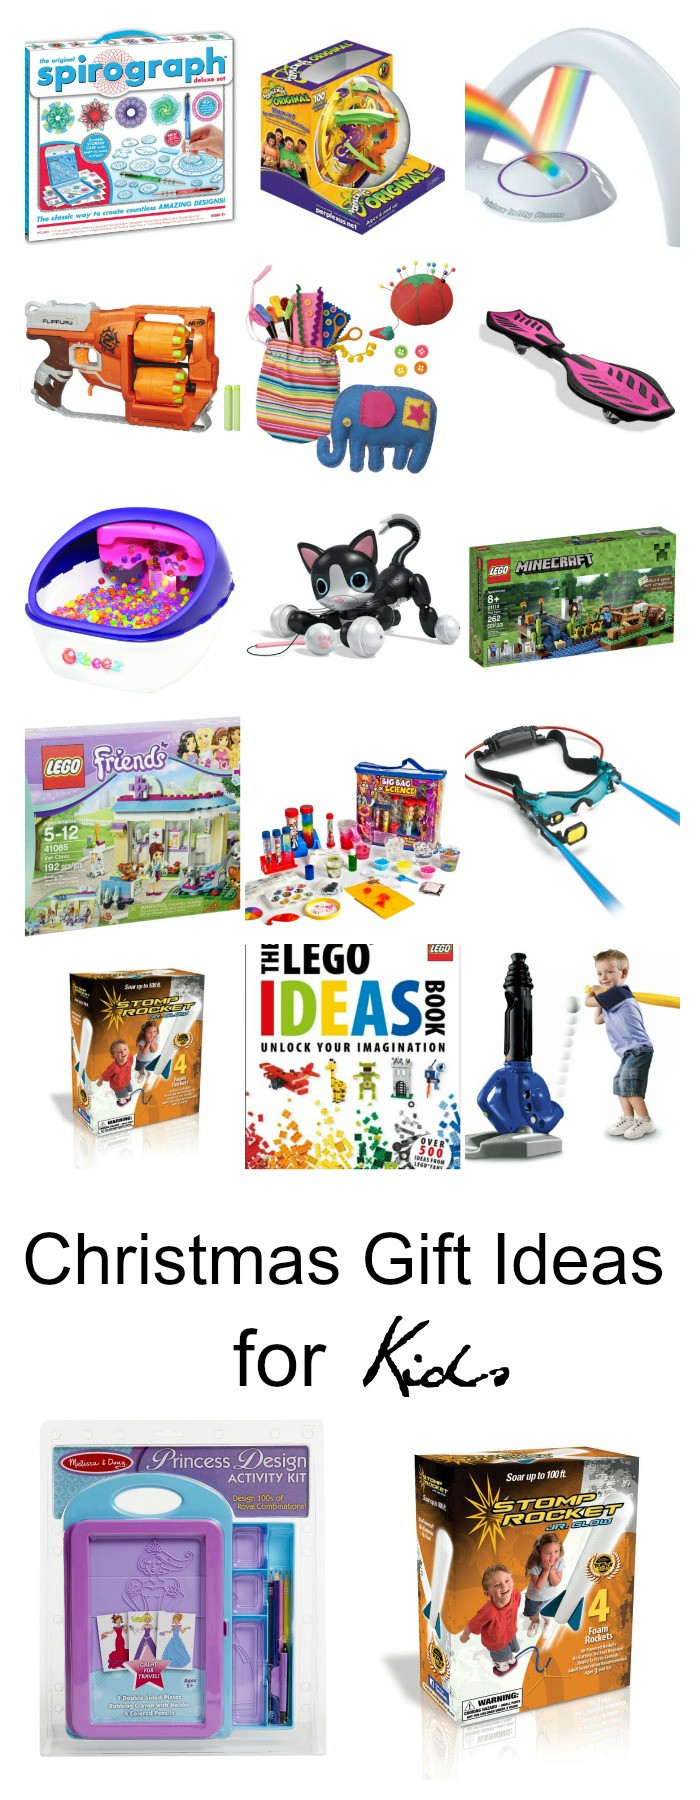 Christmas Gift Ideas For Kids
 Christmas Gift Ideas for Kids The Idea Room